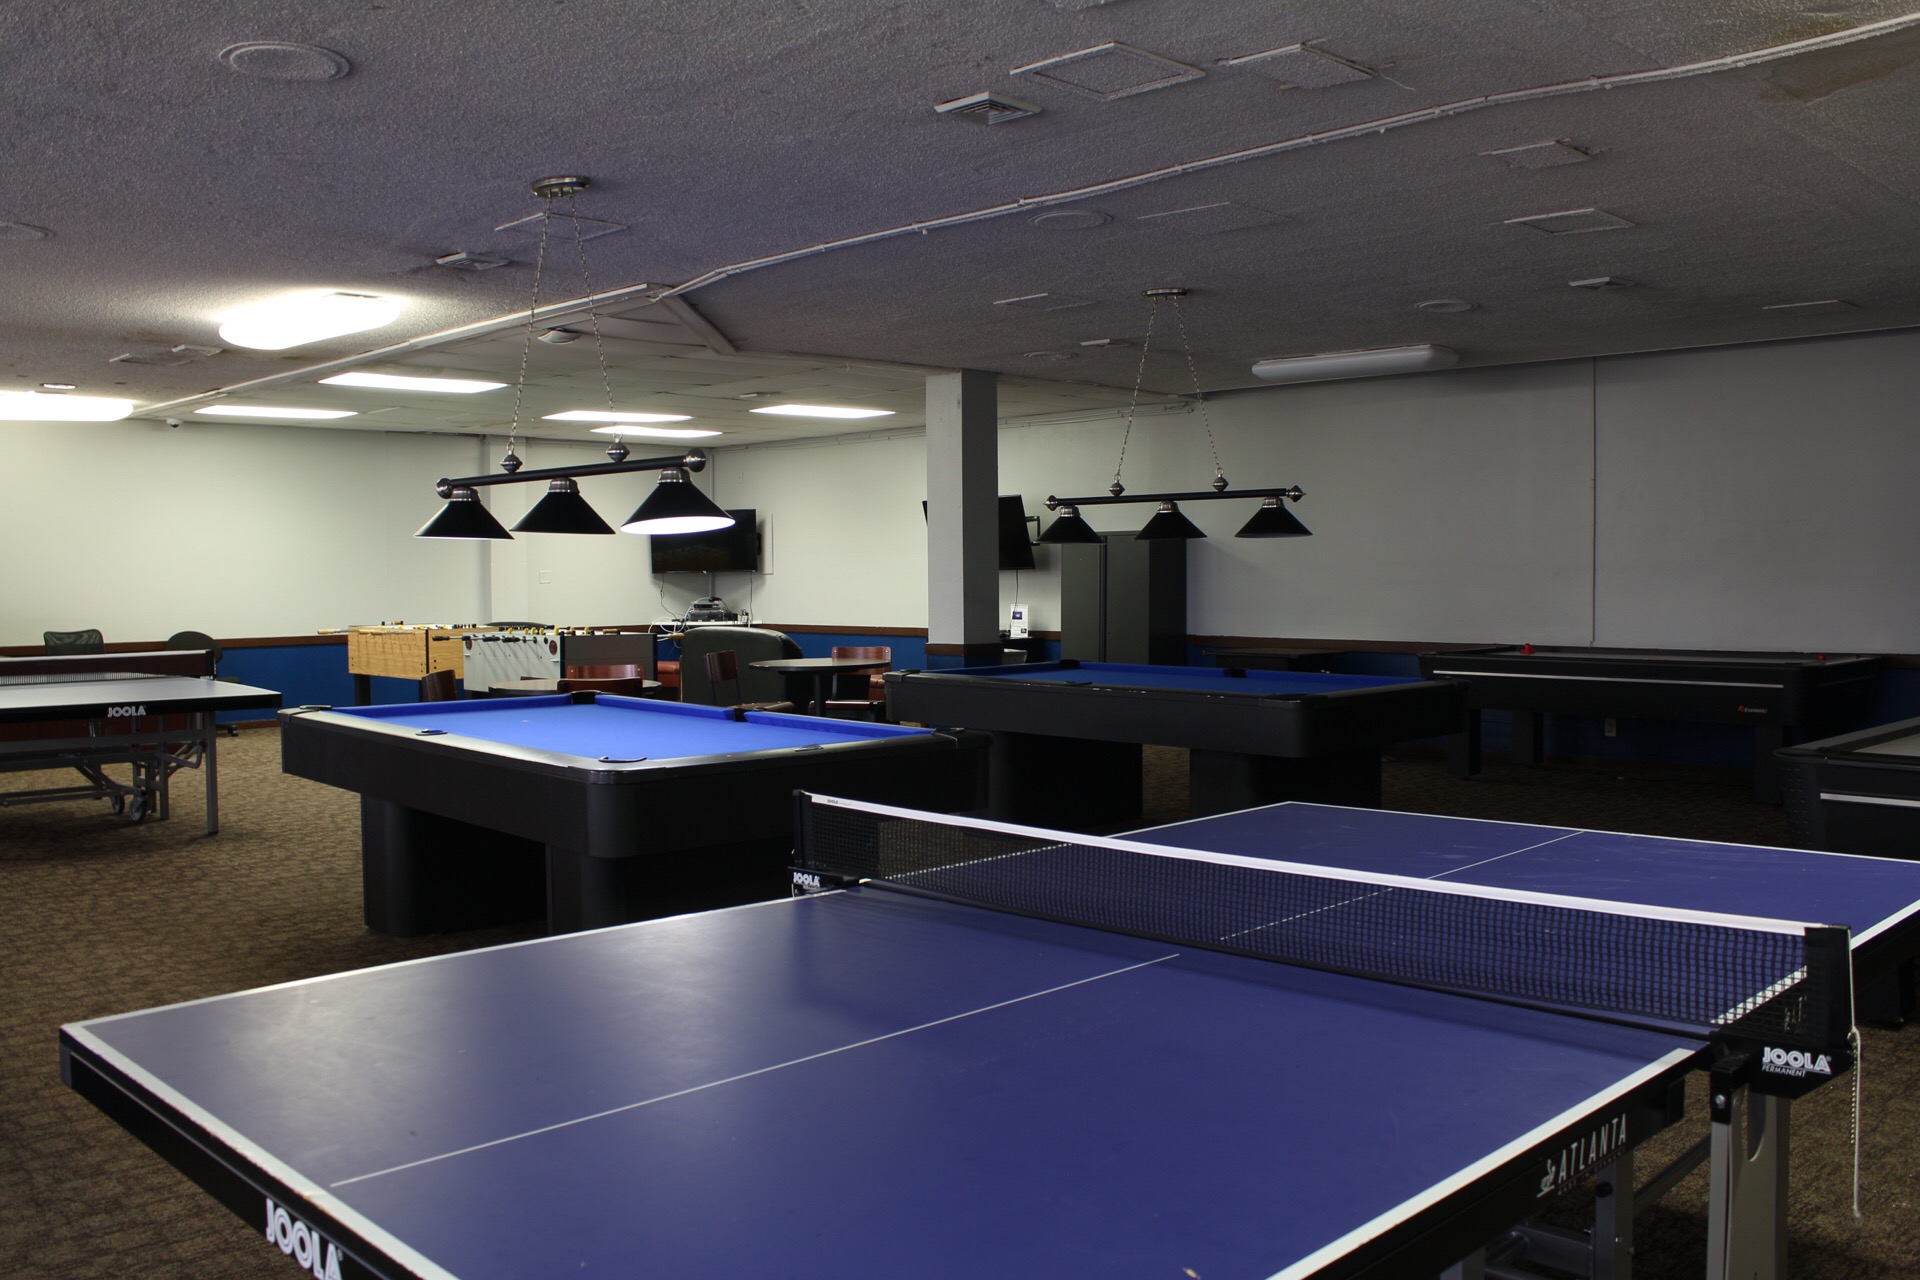 Game Room with ping pong tables, pool tables and foosball stations.